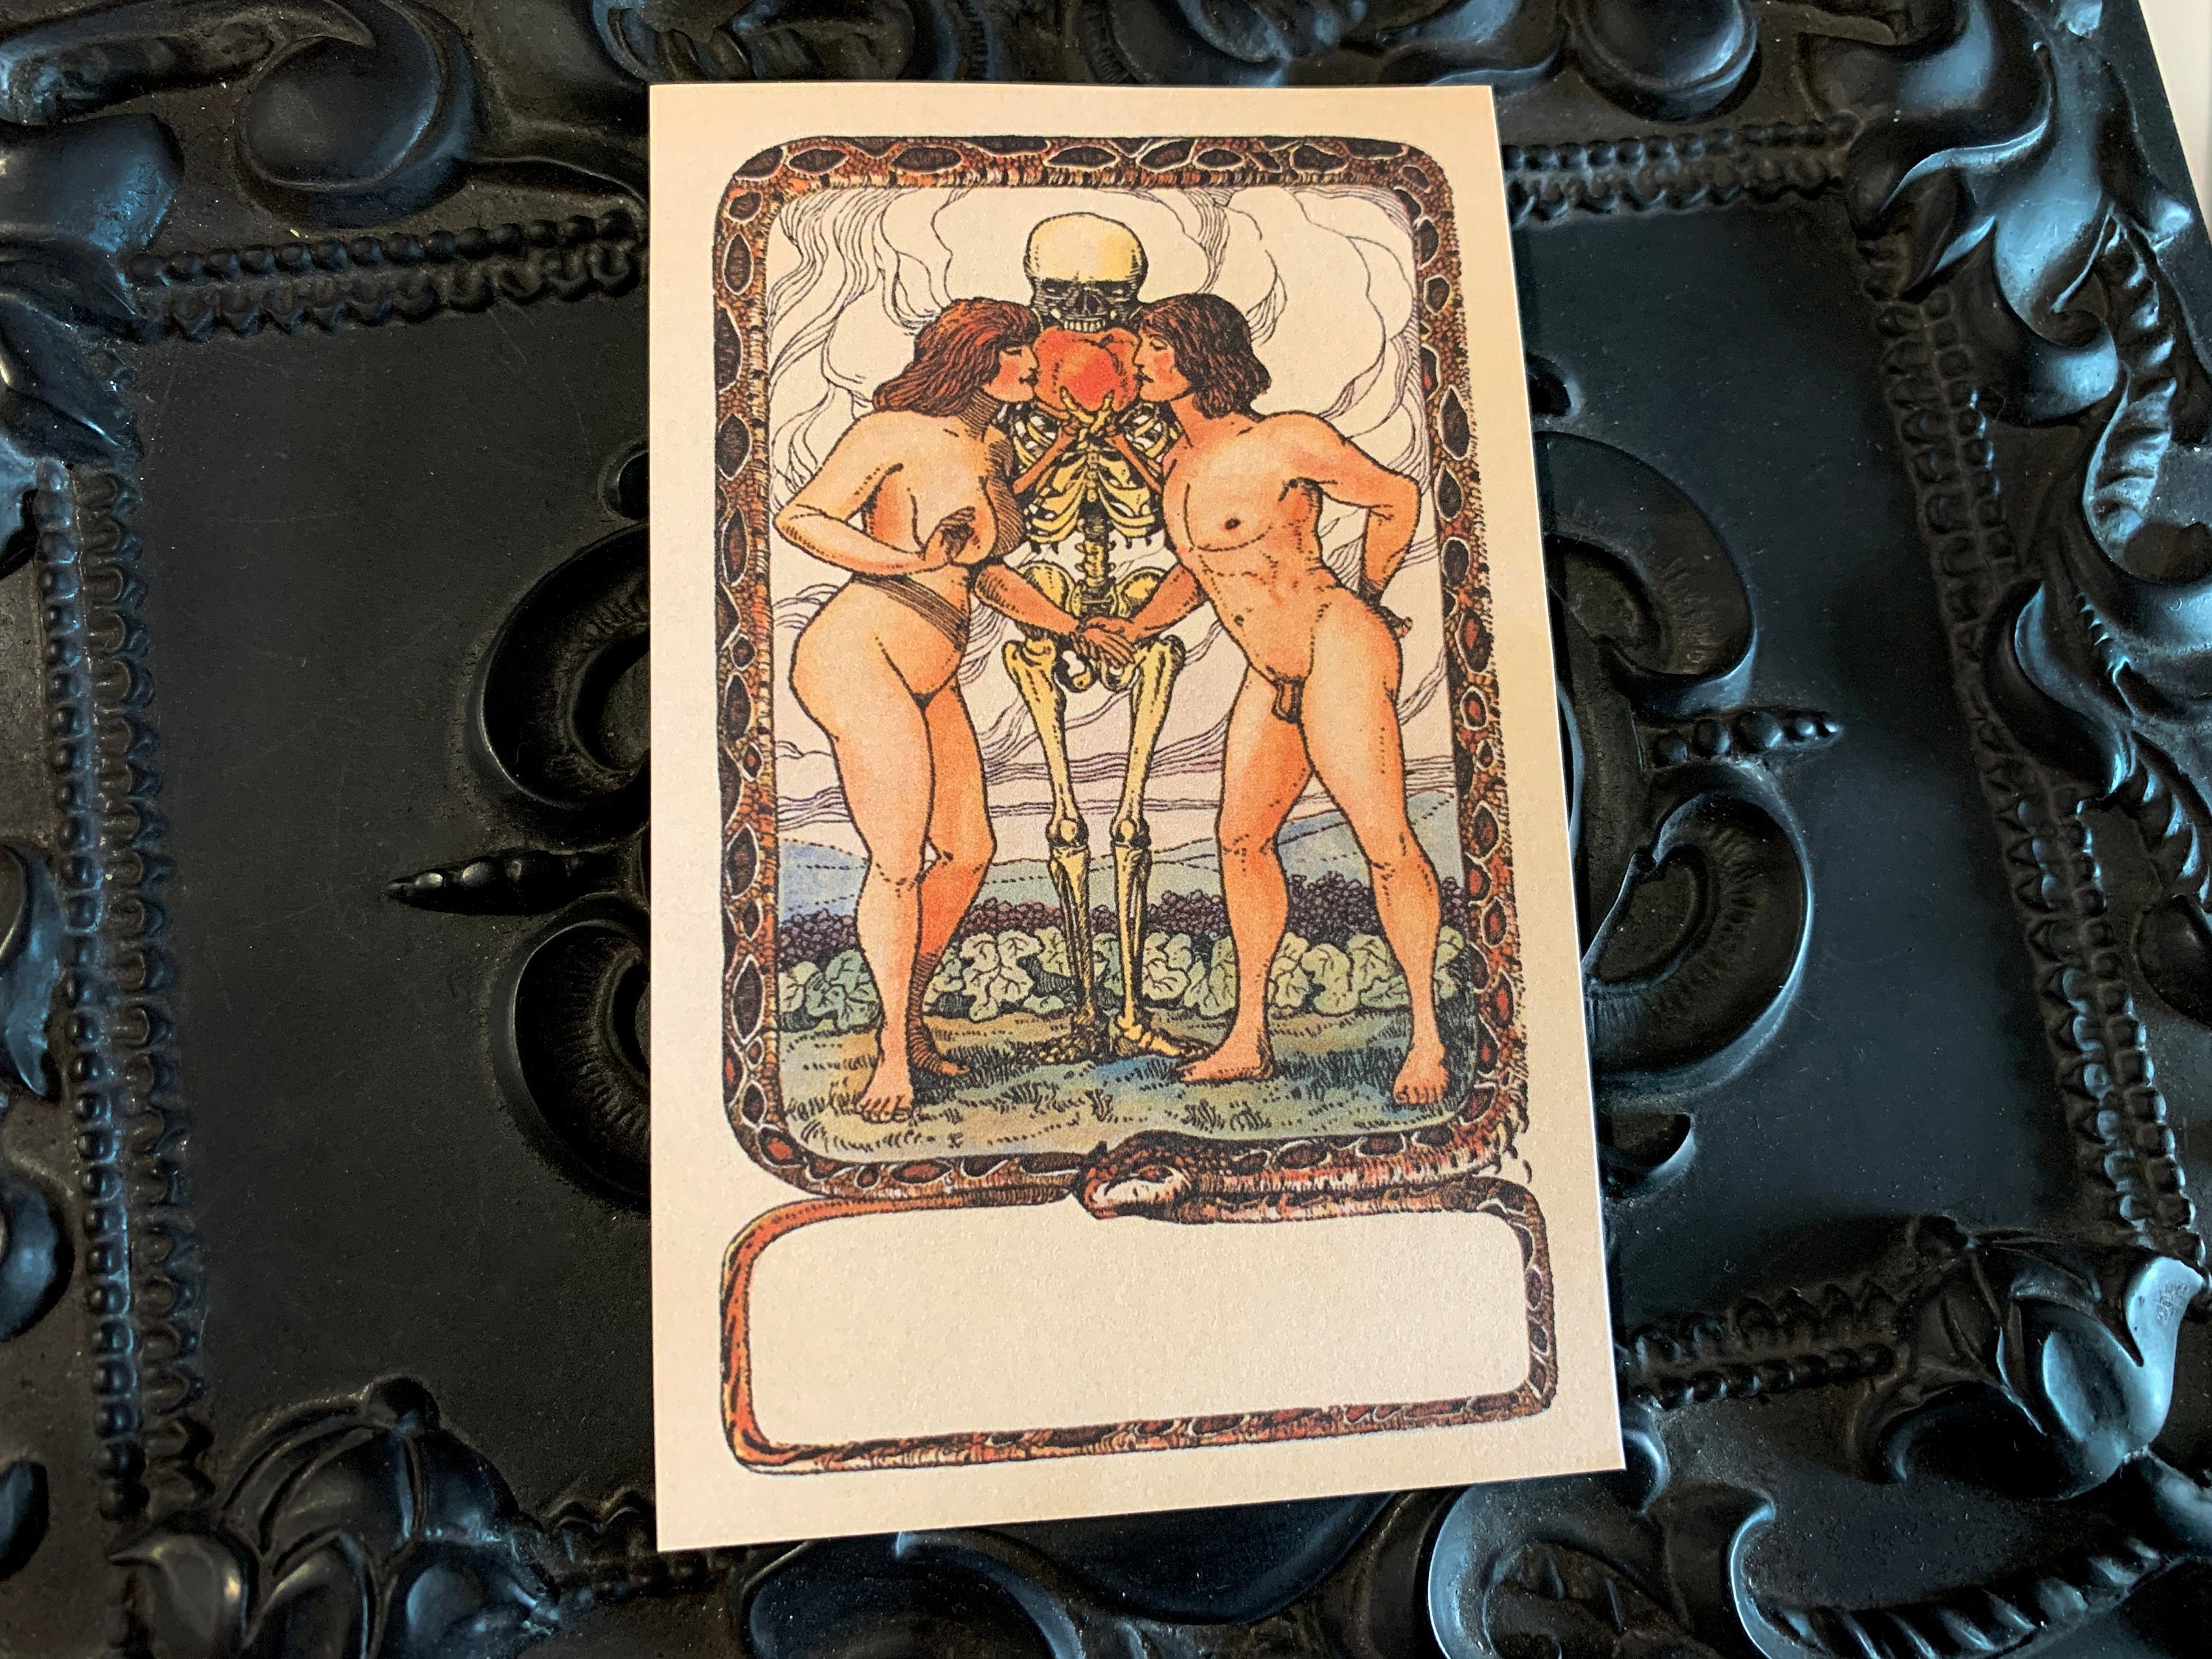 Adam and Eve, Personalized Erotic Ex-Libris Bookplates, Crafted on Traditional Gummed Paper, 4in x 2.5in, Set of 30